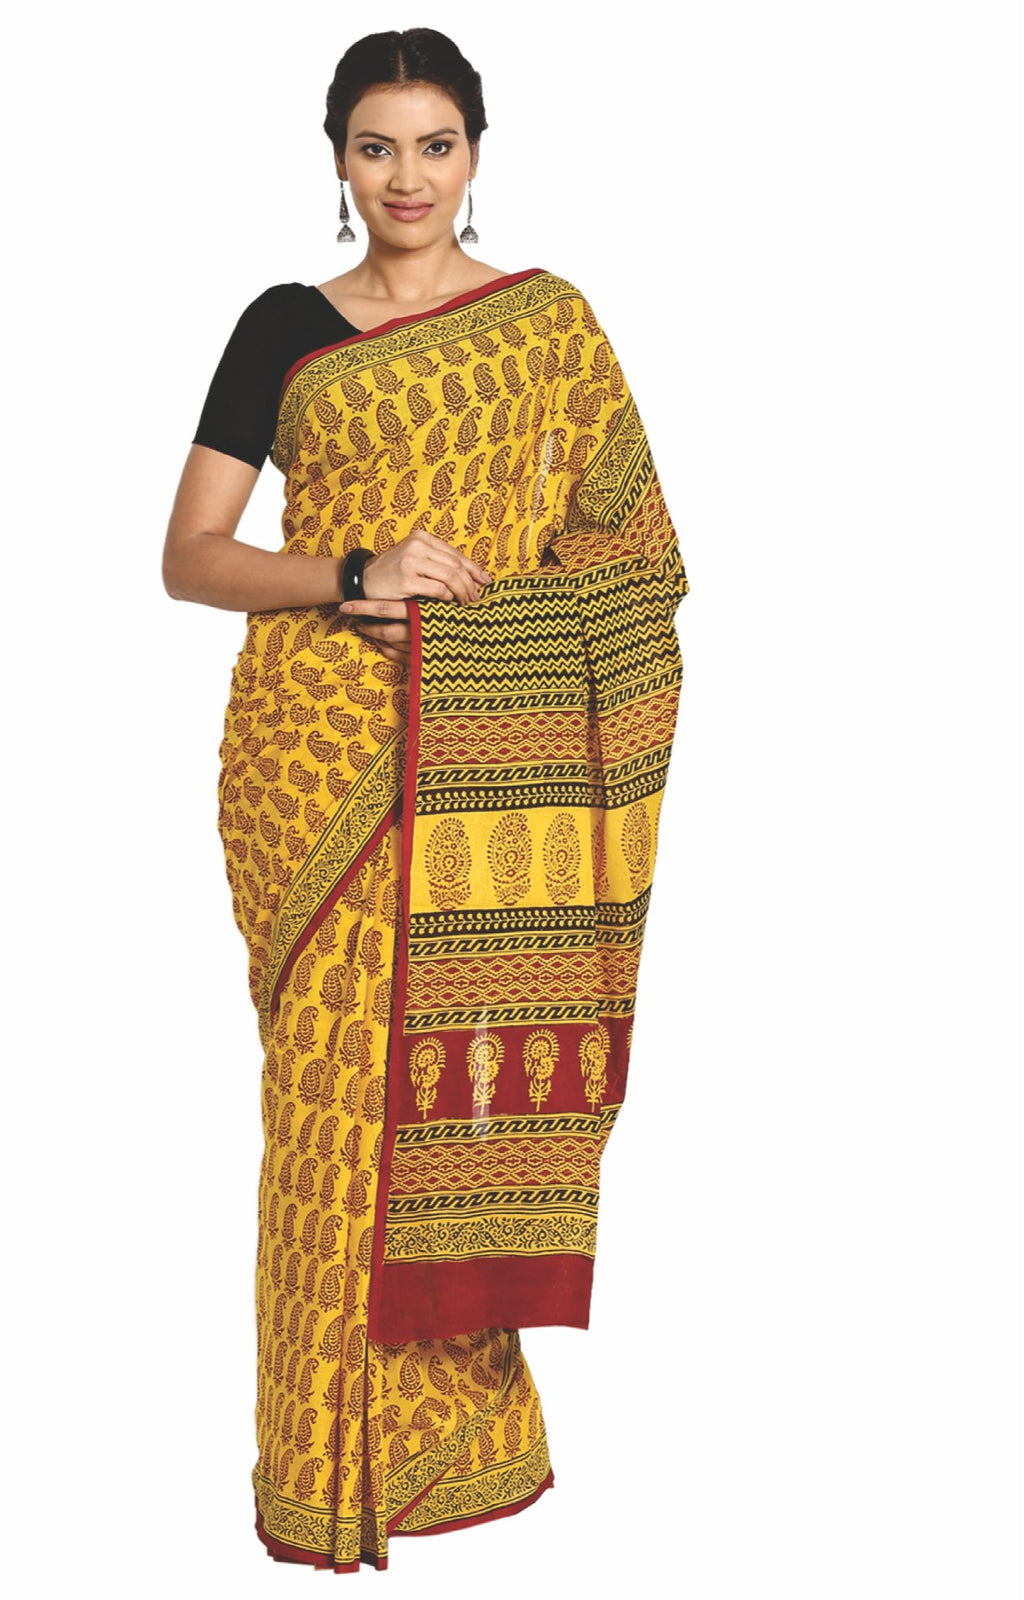 Yellow Cotton Hand Block Bagh Print Handcrafted Saree-Saree-Kalakari India-ZIBASA0037-Bagh, Cotton, Geographical Indication, Hand Blocks, Hand Crafted, Heritage Prints, Natural Dyes, Sarees, Sustainable Fabrics-[Linen,Ethnic,wear,Fashionista,Handloom,Handicraft,Indigo,blockprint,block,print,Cotton,Chanderi,Blue, latest,classy,party,bollywood,trendy,summer,style,traditional,formal,elegant,unique,style,hand,block,print, dabu,booti,gift,present,glamorous,affordable,collectible,Sari,Saree,printed, h